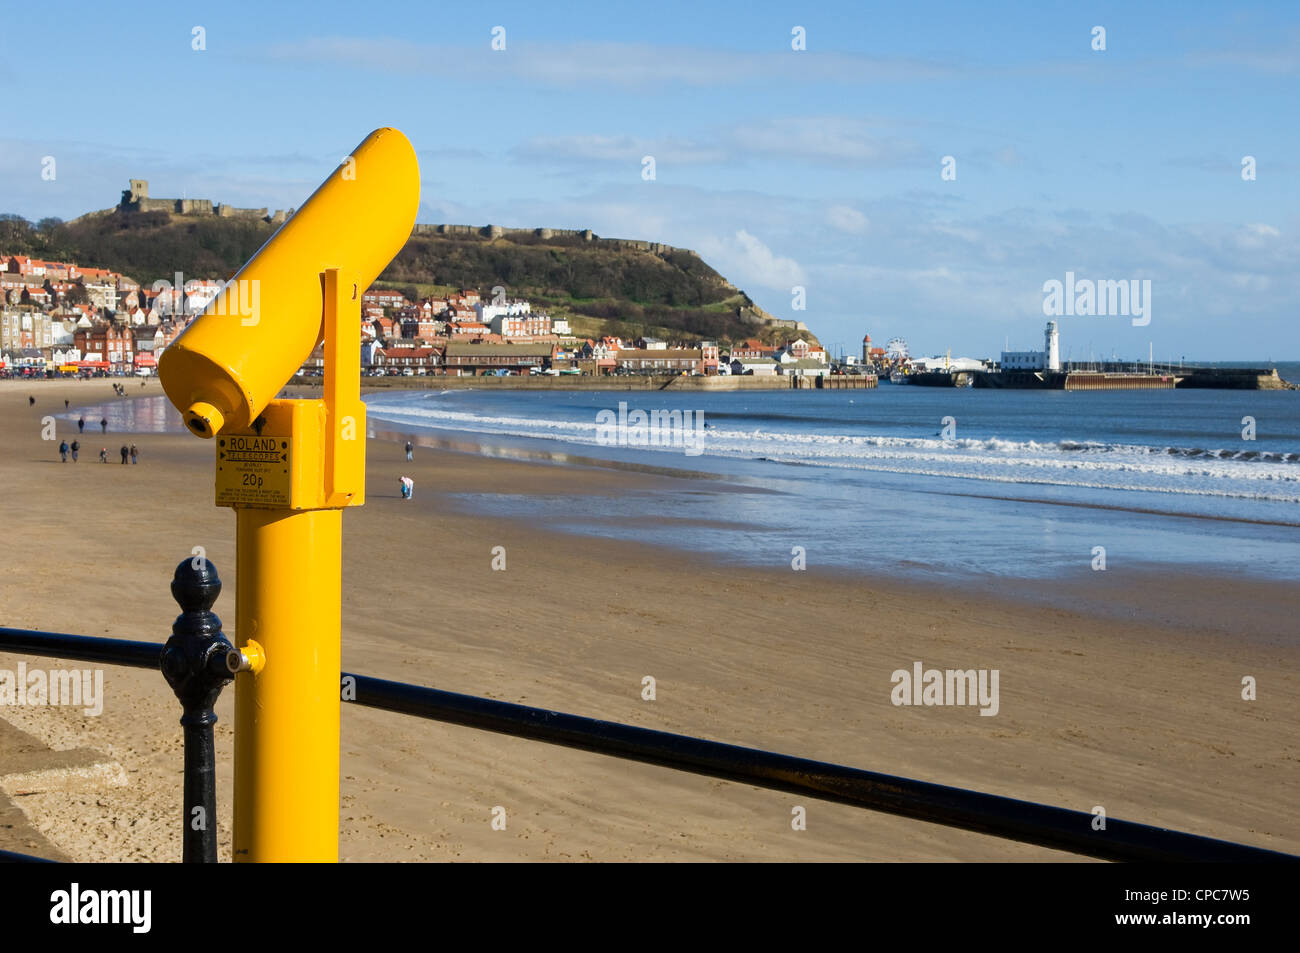 Seaside telescope view at South Bay beach in winter Scarborough coast seafront resort North Yorkshire England UK United Kingdom GB Great Britain Stock Photo